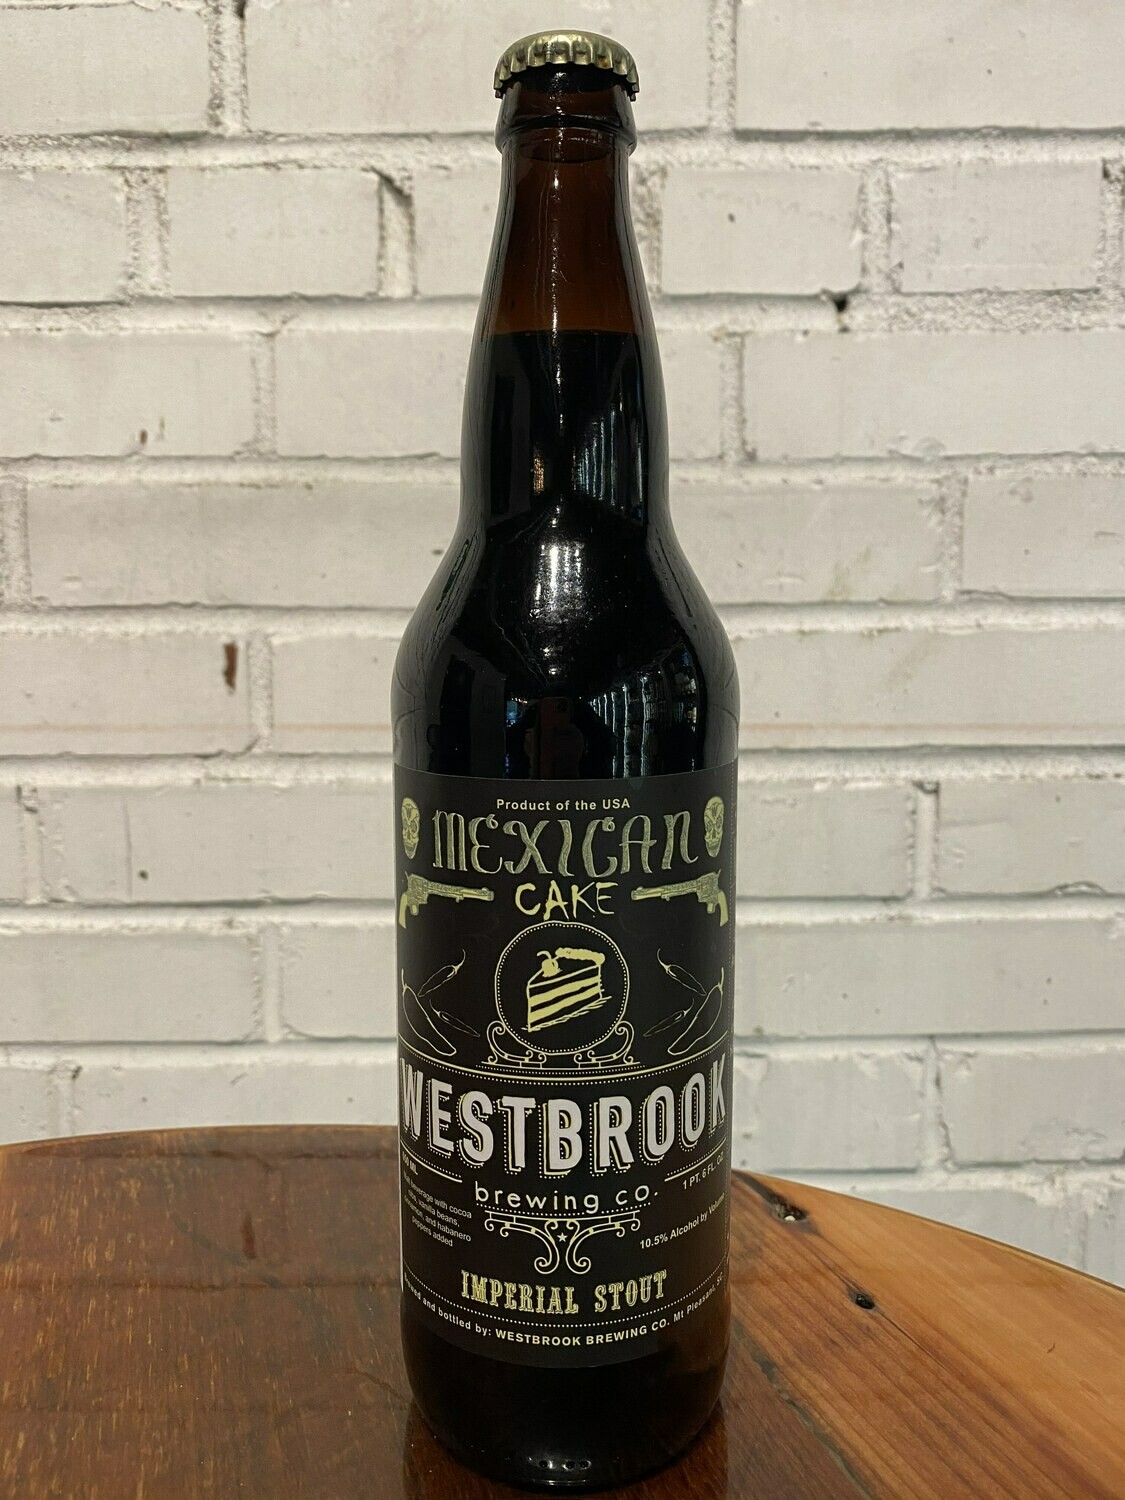 Westbrook Mexican Cake Imperial Stout (22oz)